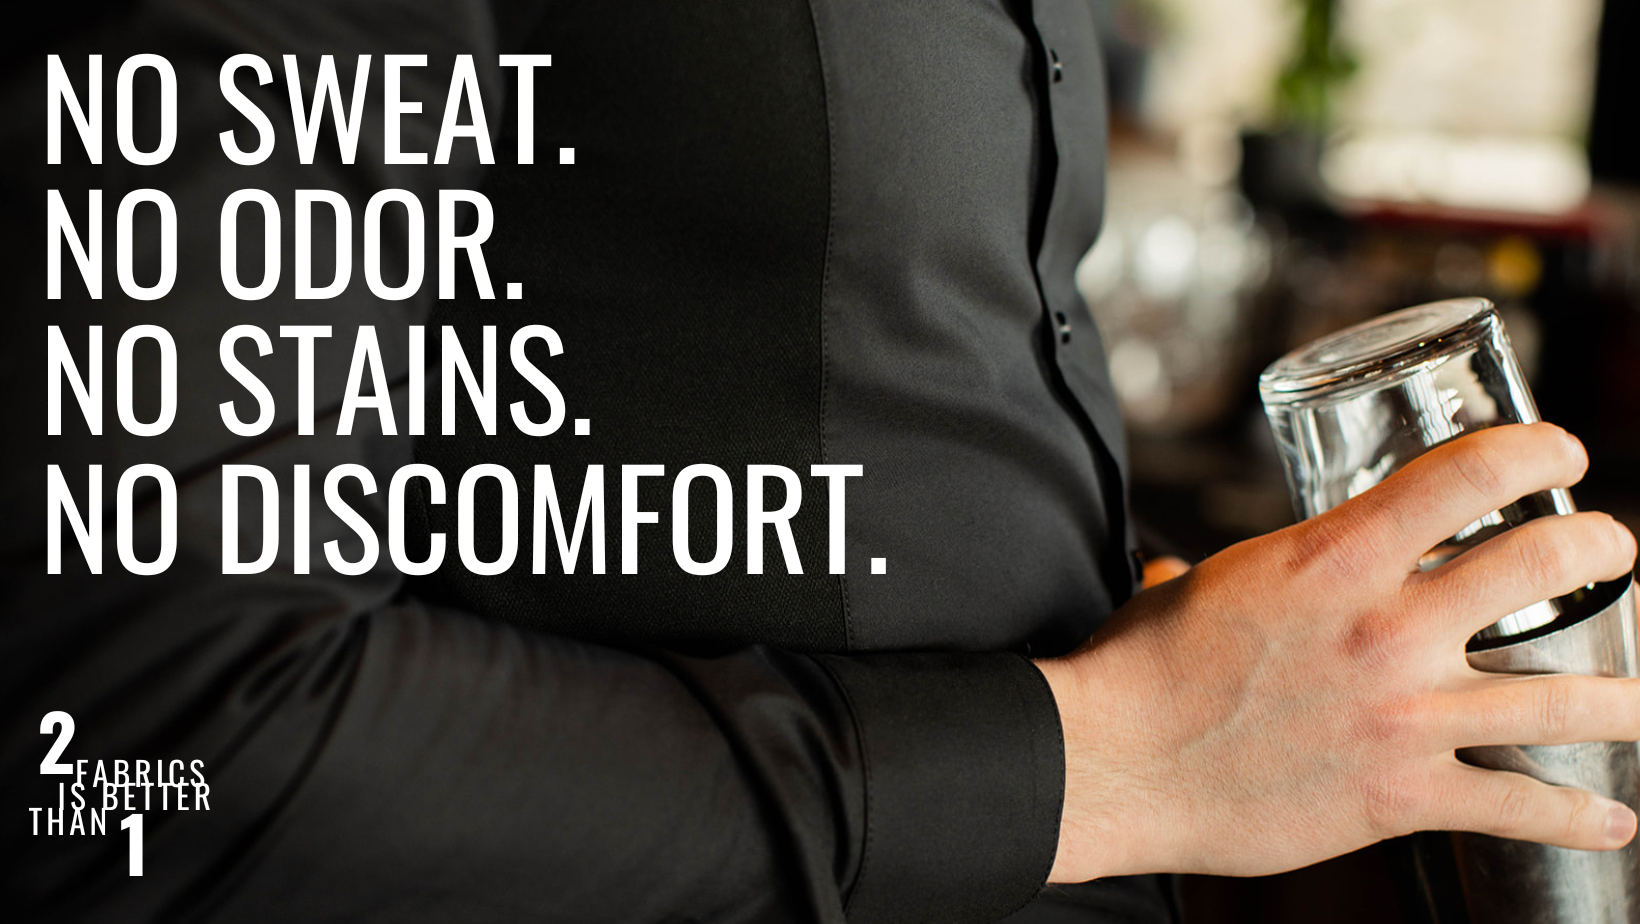 Have you ever felt embarrassed by sweat stains? - If you are one of those people who people who sweat excessively this sweat proof Athletic fit dress shirt is the one for you. Made from high-performance men's dress shirt is sweat proof and athletic so you can move!